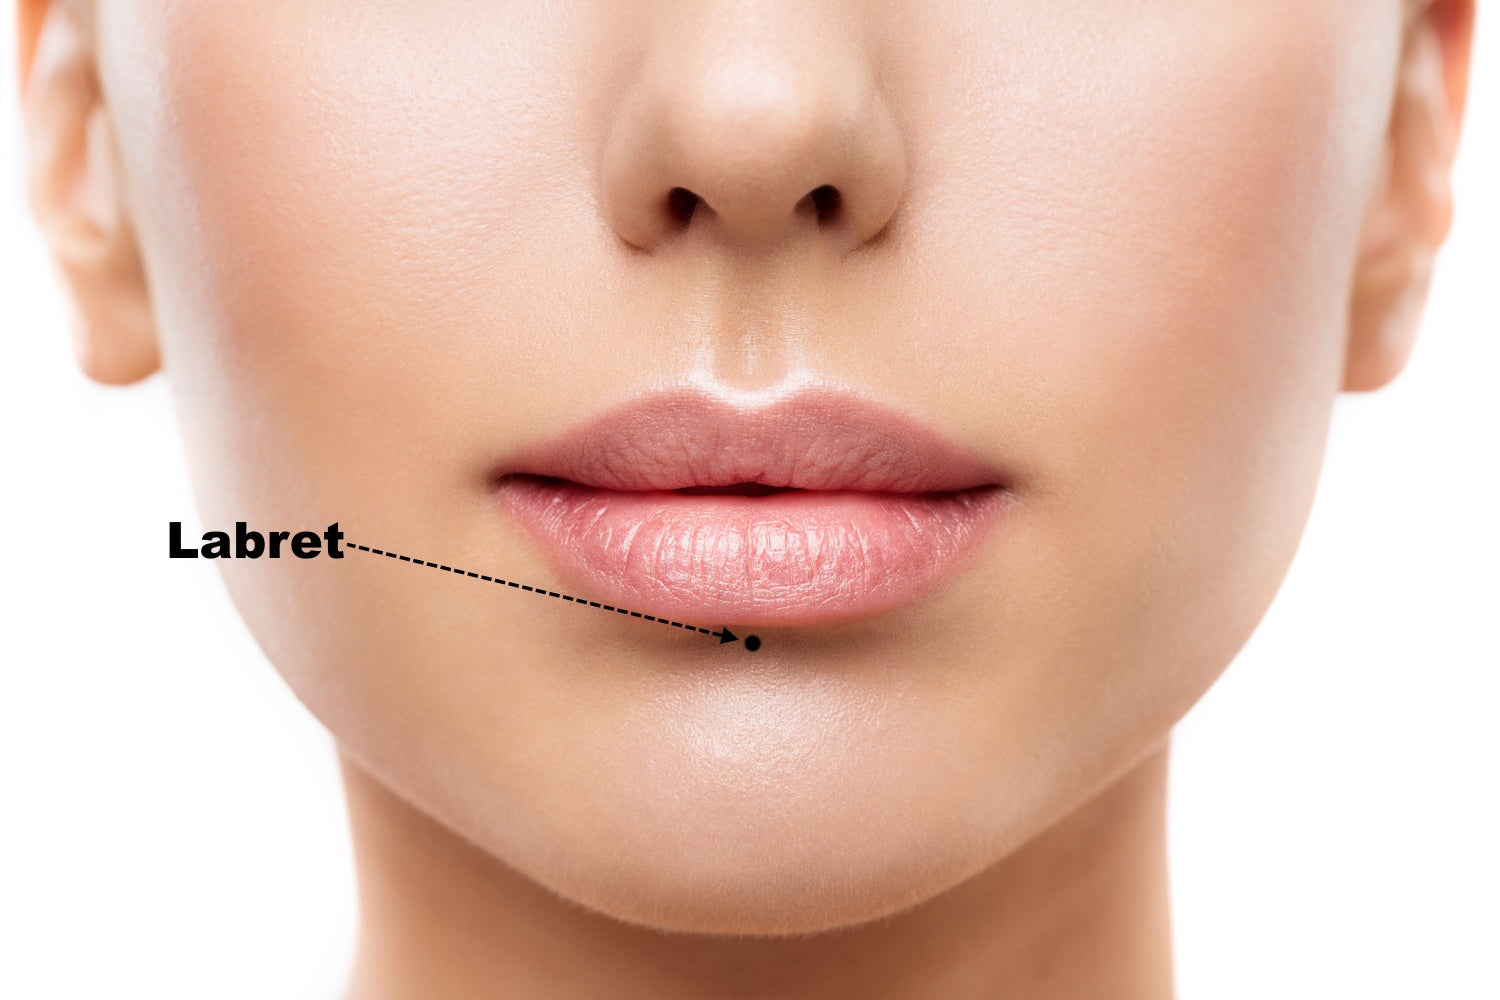 A diagram showing where the labret piercing is located on the face.